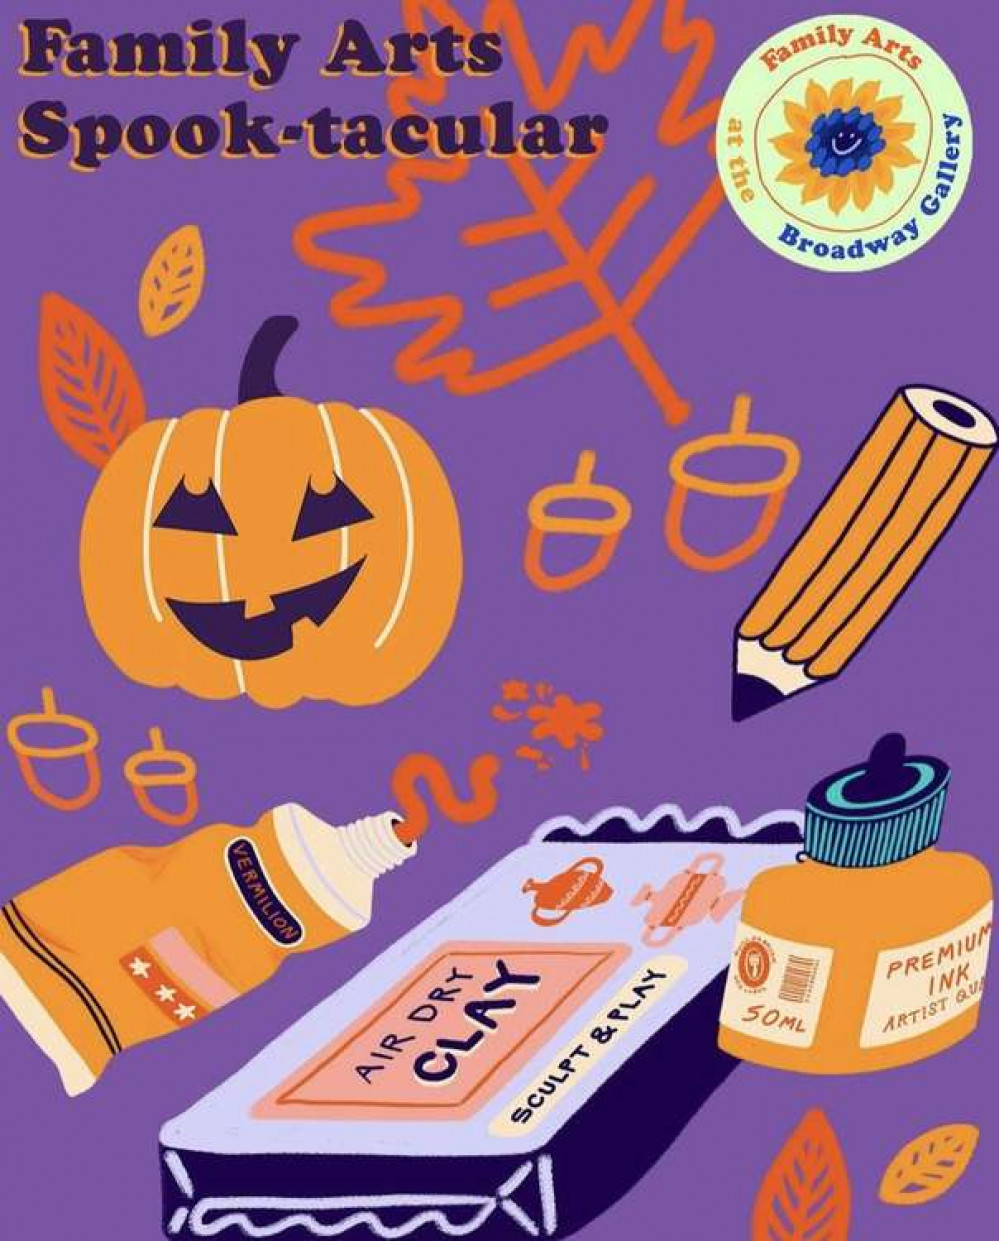 Letchworth:  Family arts Halloween Spook-tacular at Broadway Studio and Gallery